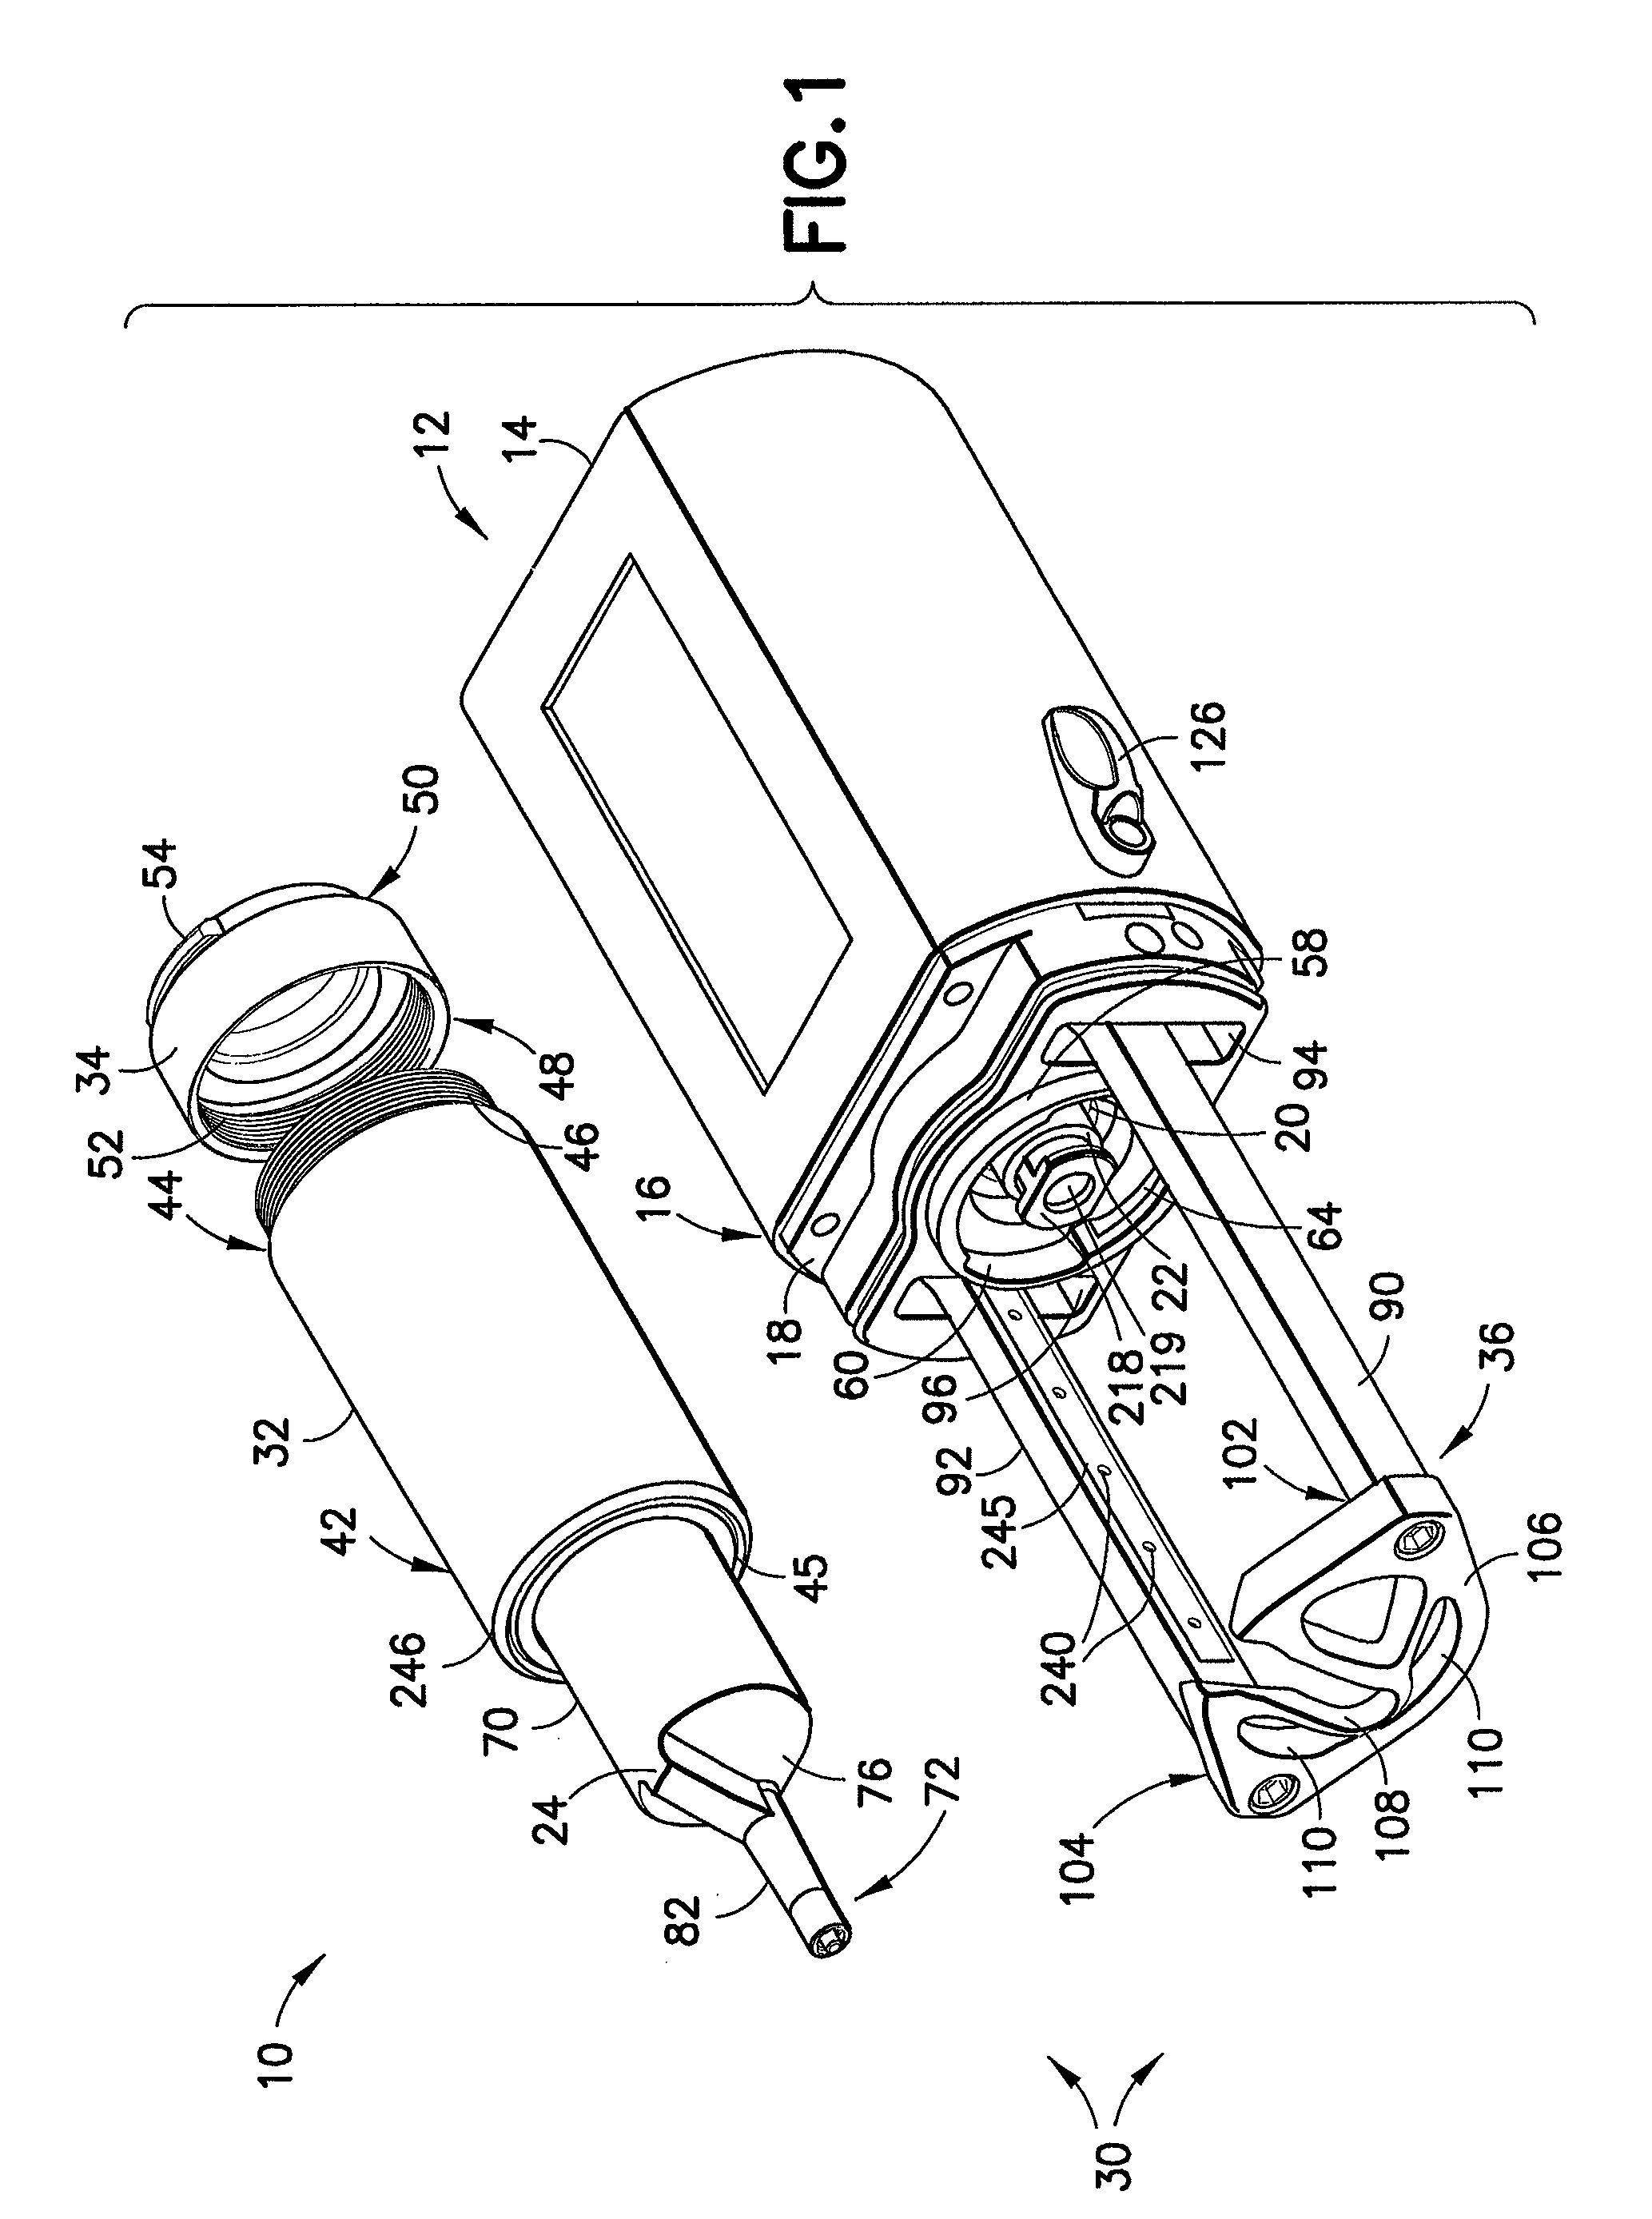 Syringe having a proximal end with an outward extending lip